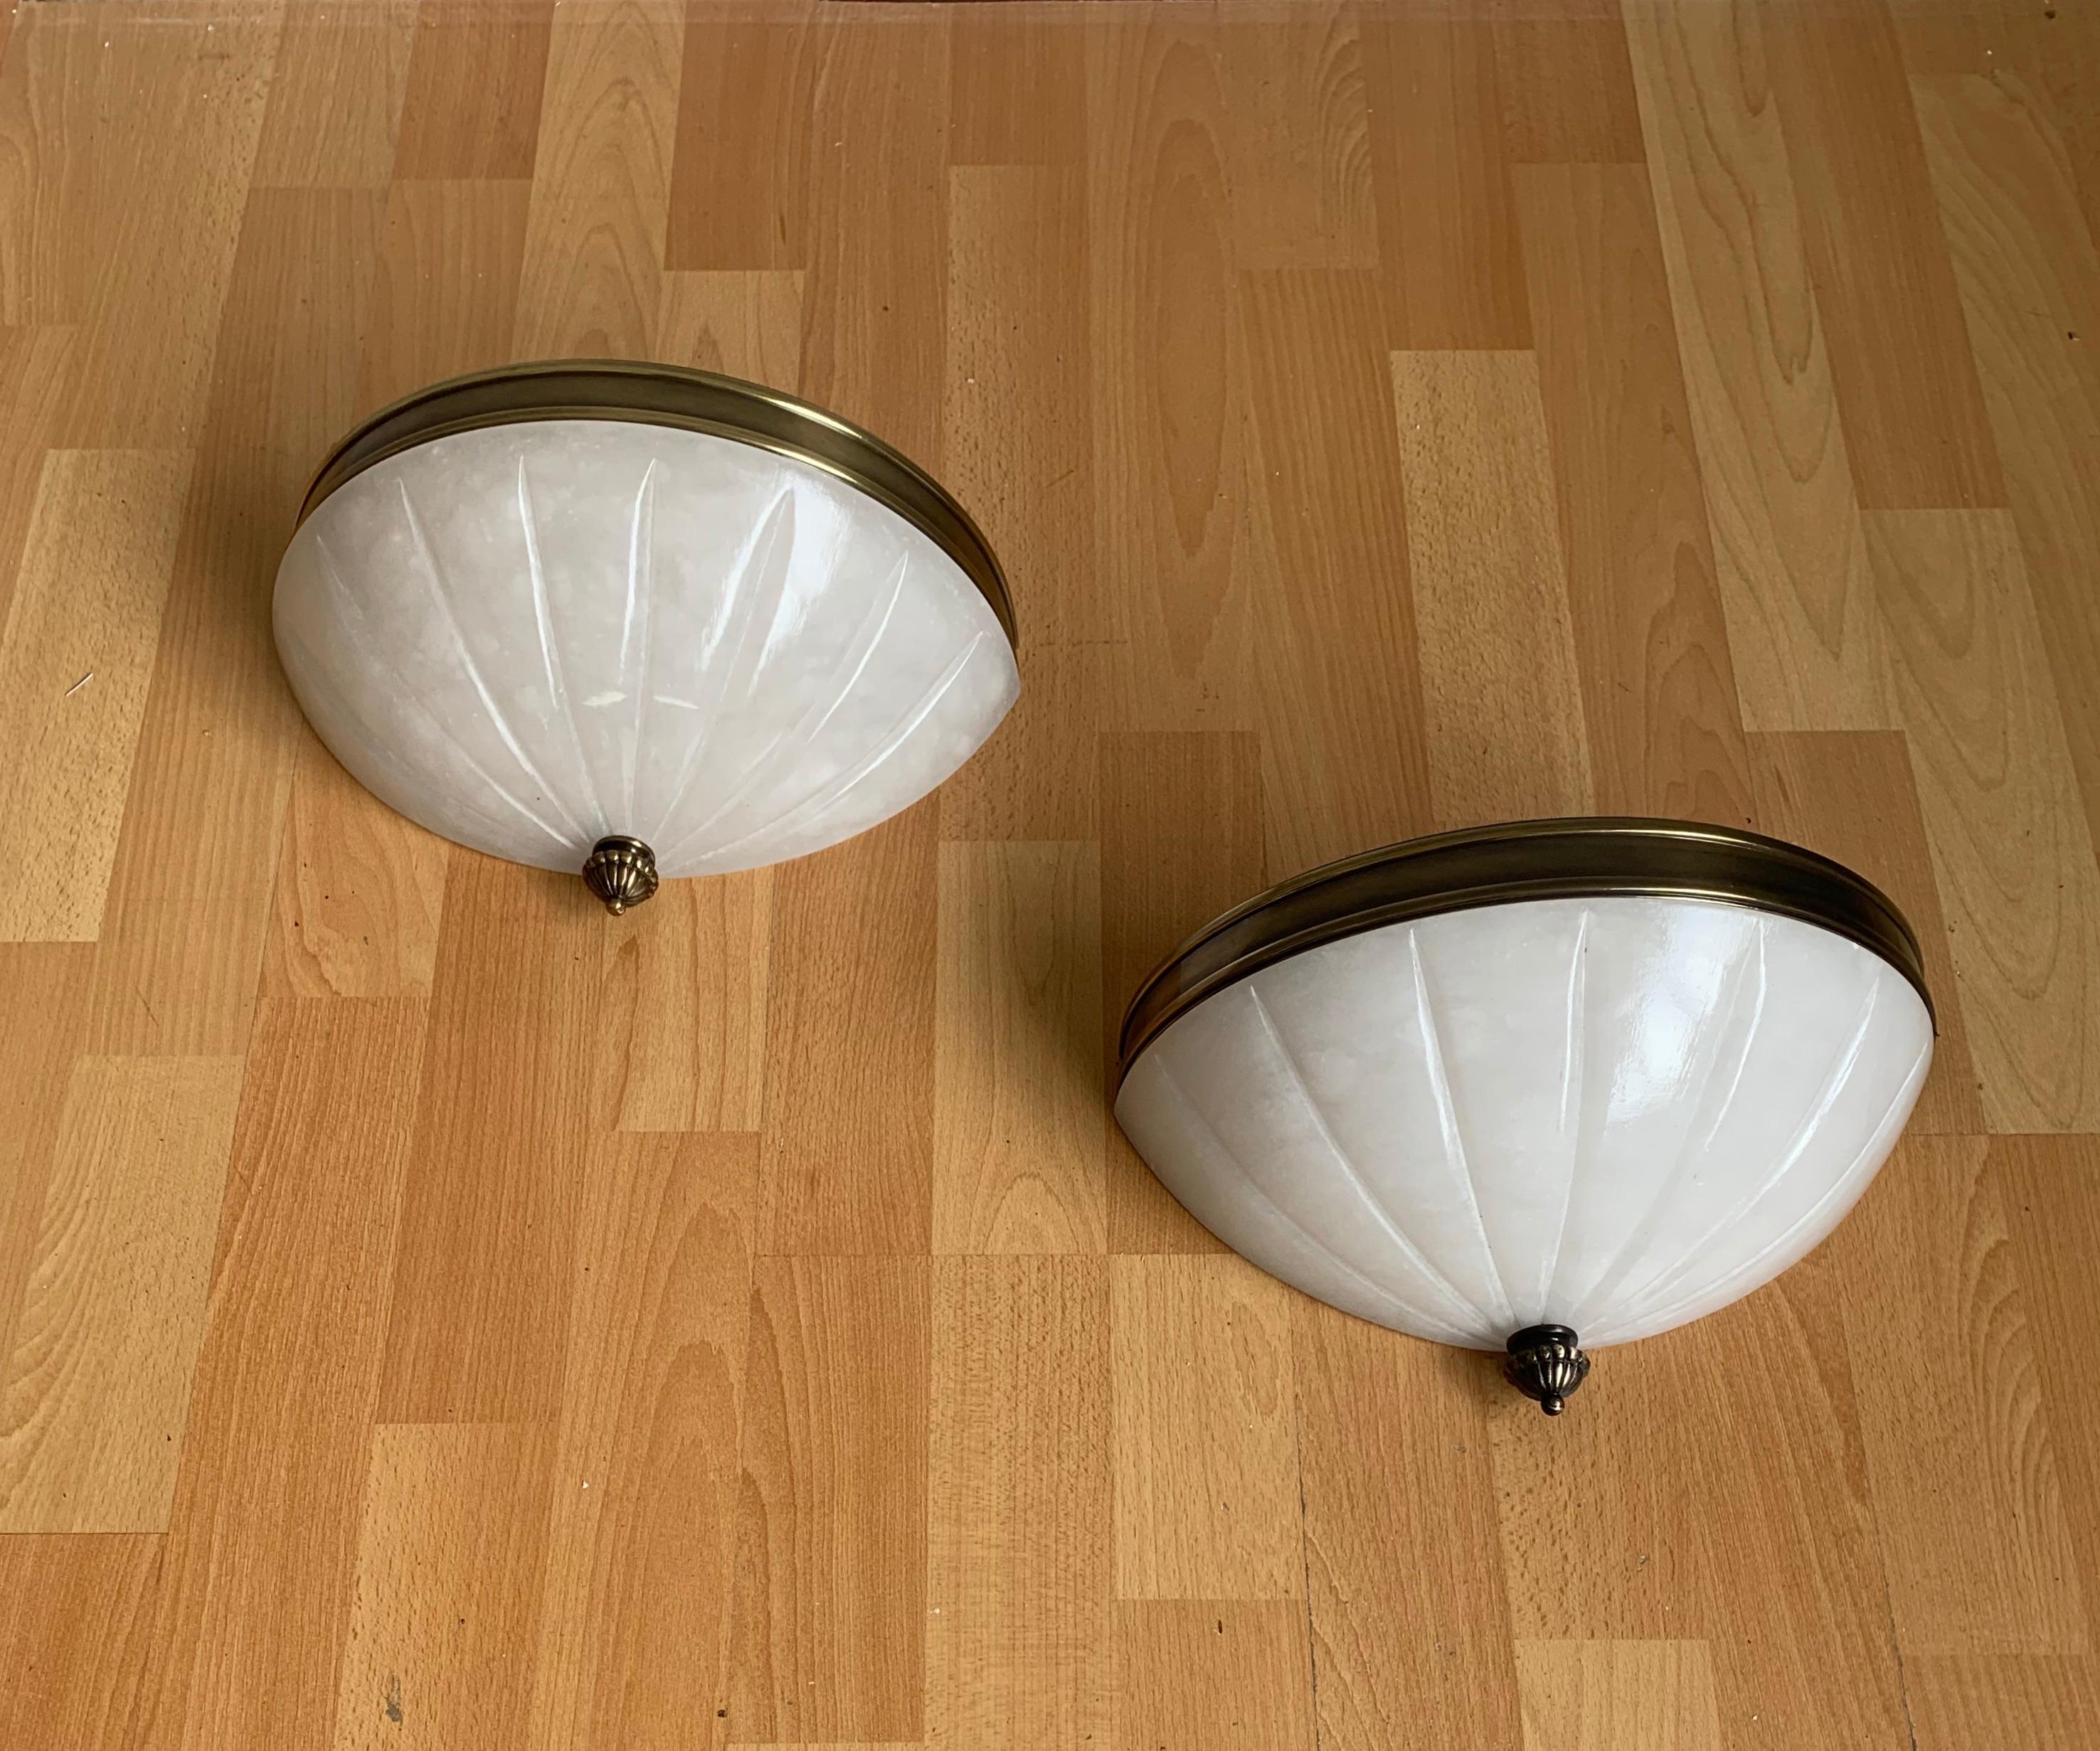 European Rare Pair of Midcentury Modern, Alabaster & Brass Wall Sconces / Fixtures For Sale